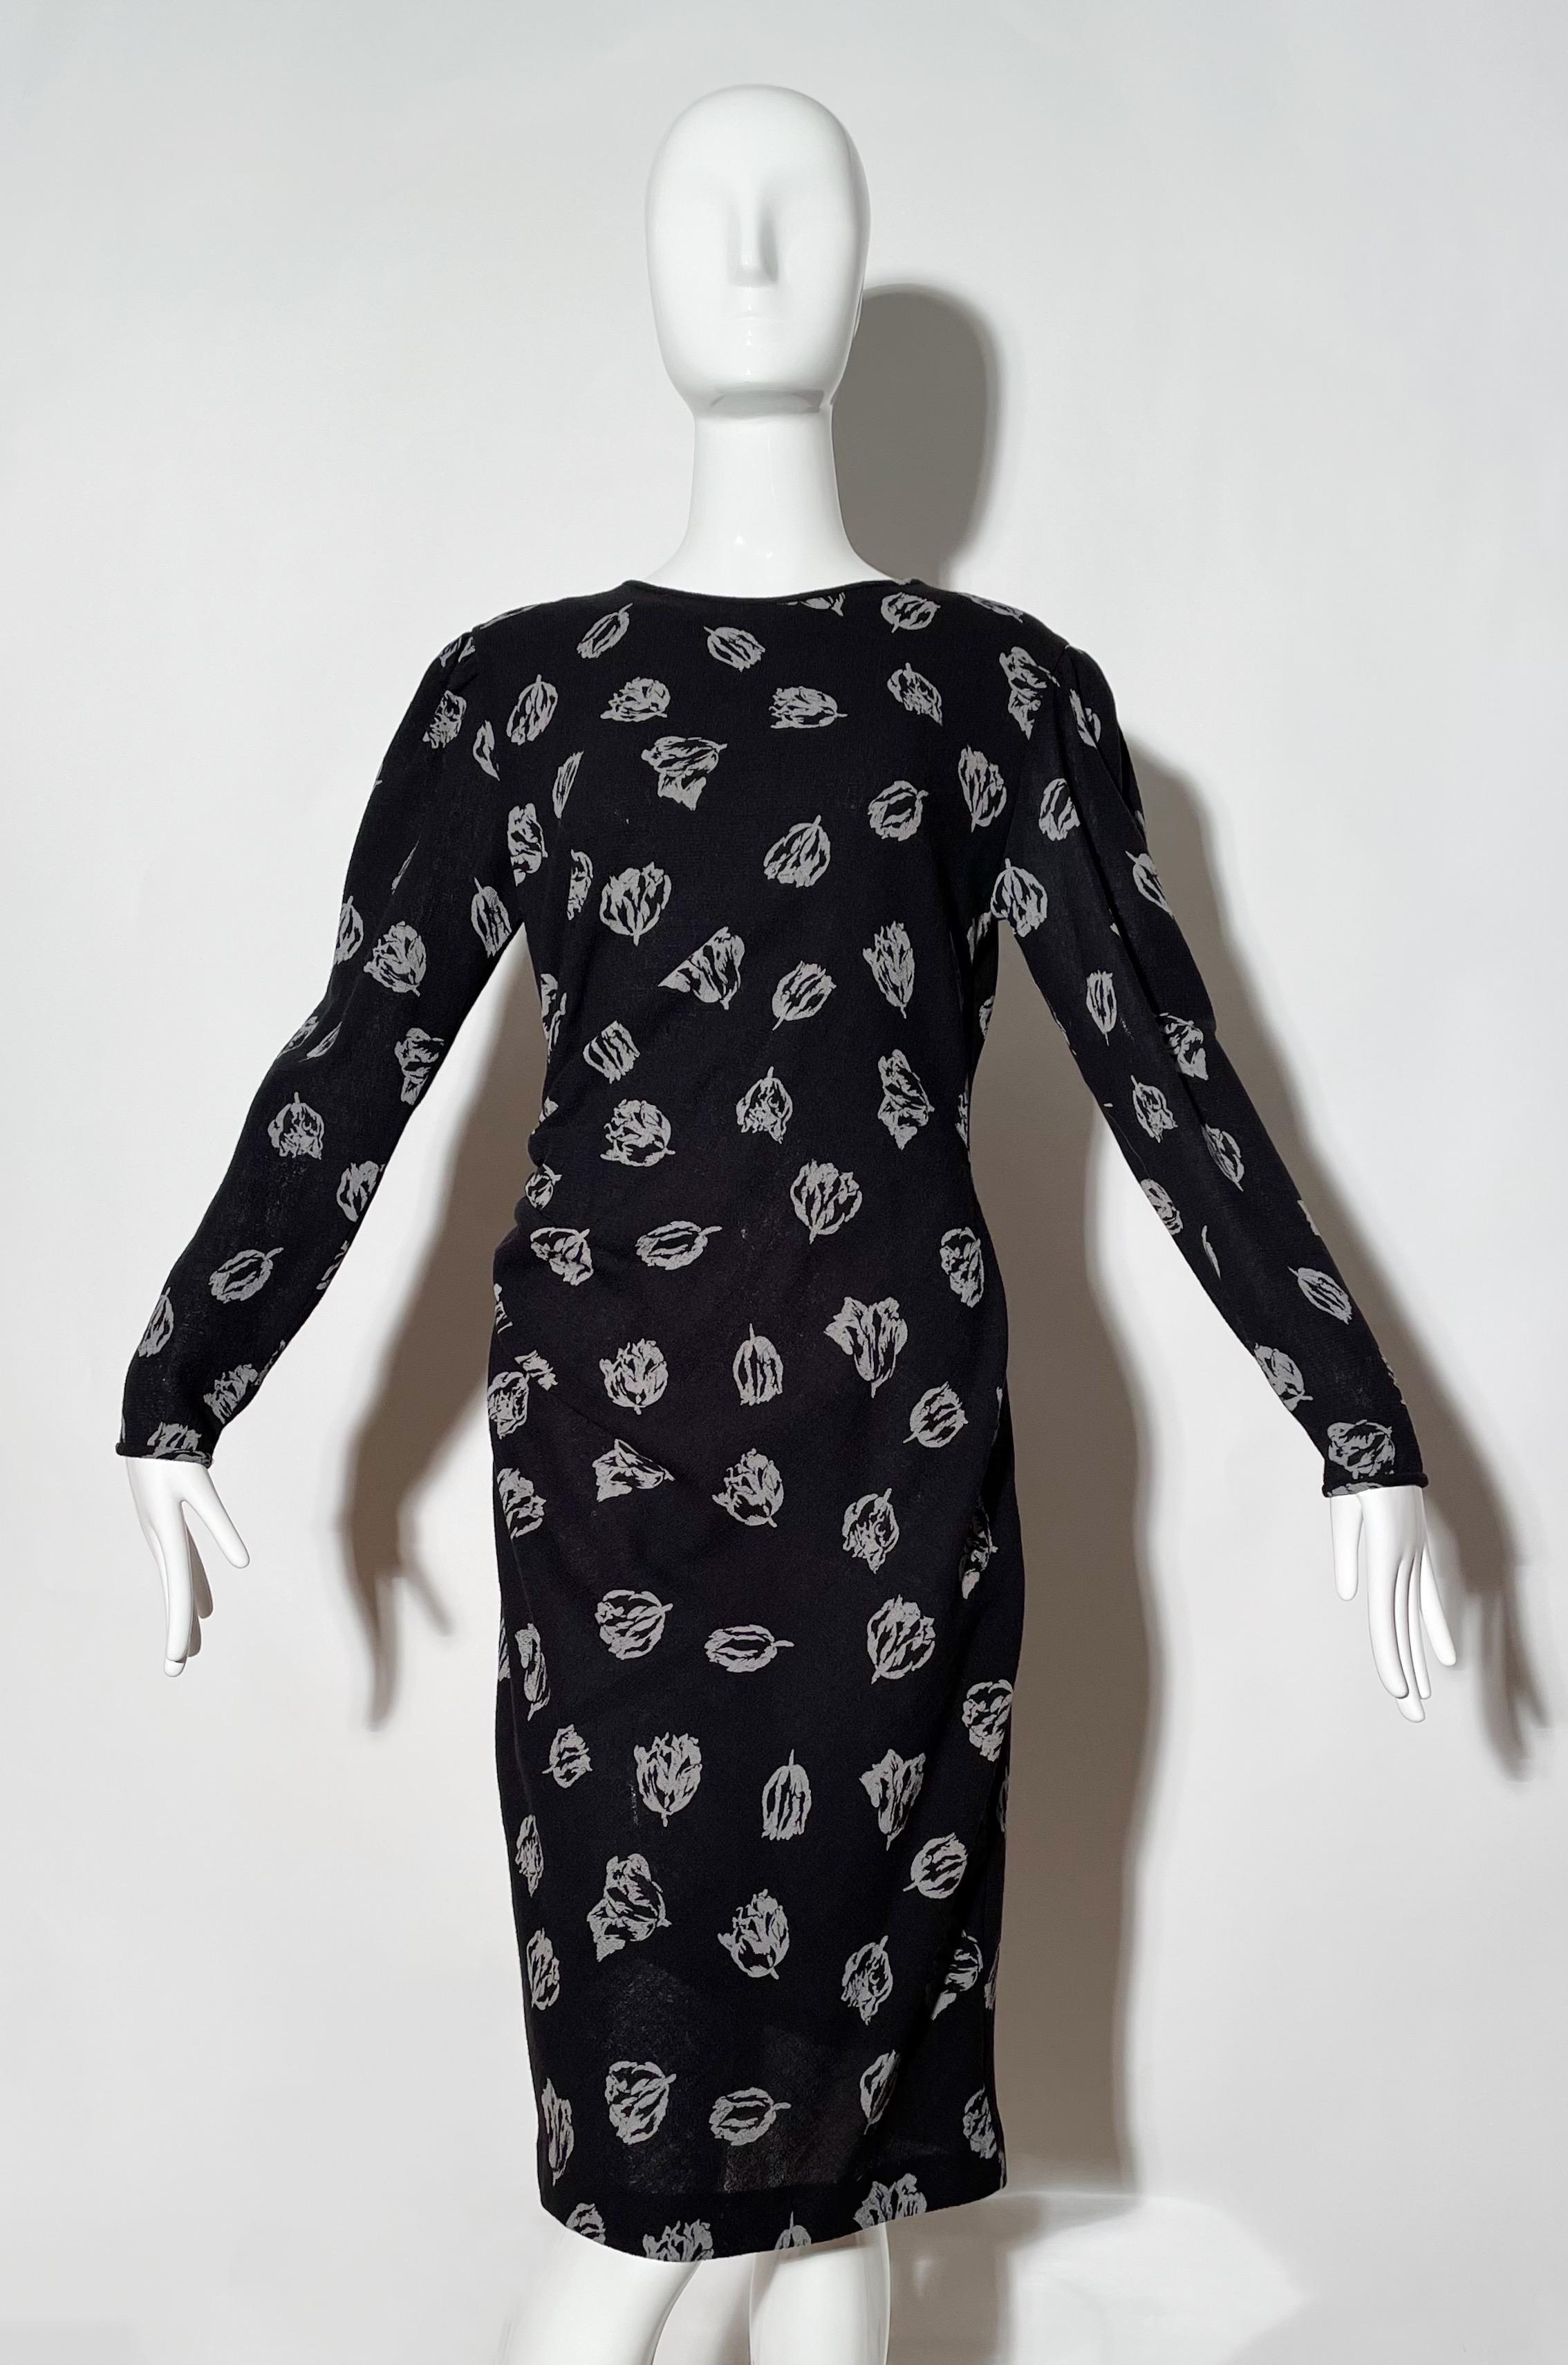 Black and grey floral dress. Ruched side. Rear zipper. Rear slit. Lined. Made in Hong Kong
*Condition: excellent vintage condition. No visible flaws.

Measurements Taken Laying Flat (inches)—
Shoulder to Shoulder: 16 in.
Bust: 34 in.
Waist: 28